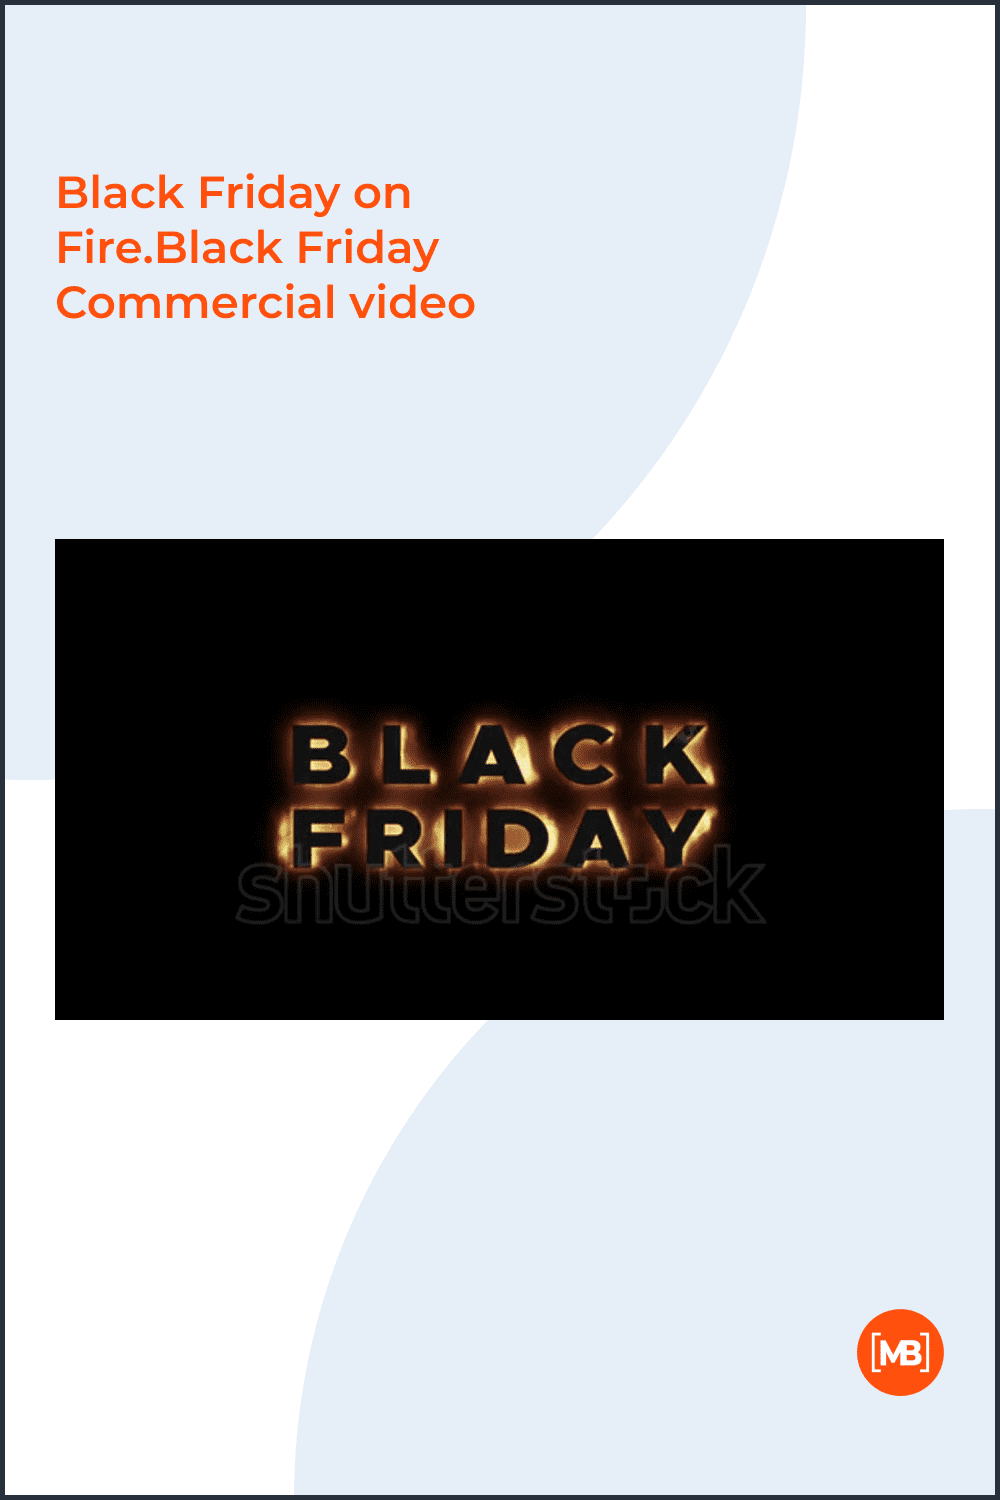 Black Friday on fire.Black Friday commercial video.